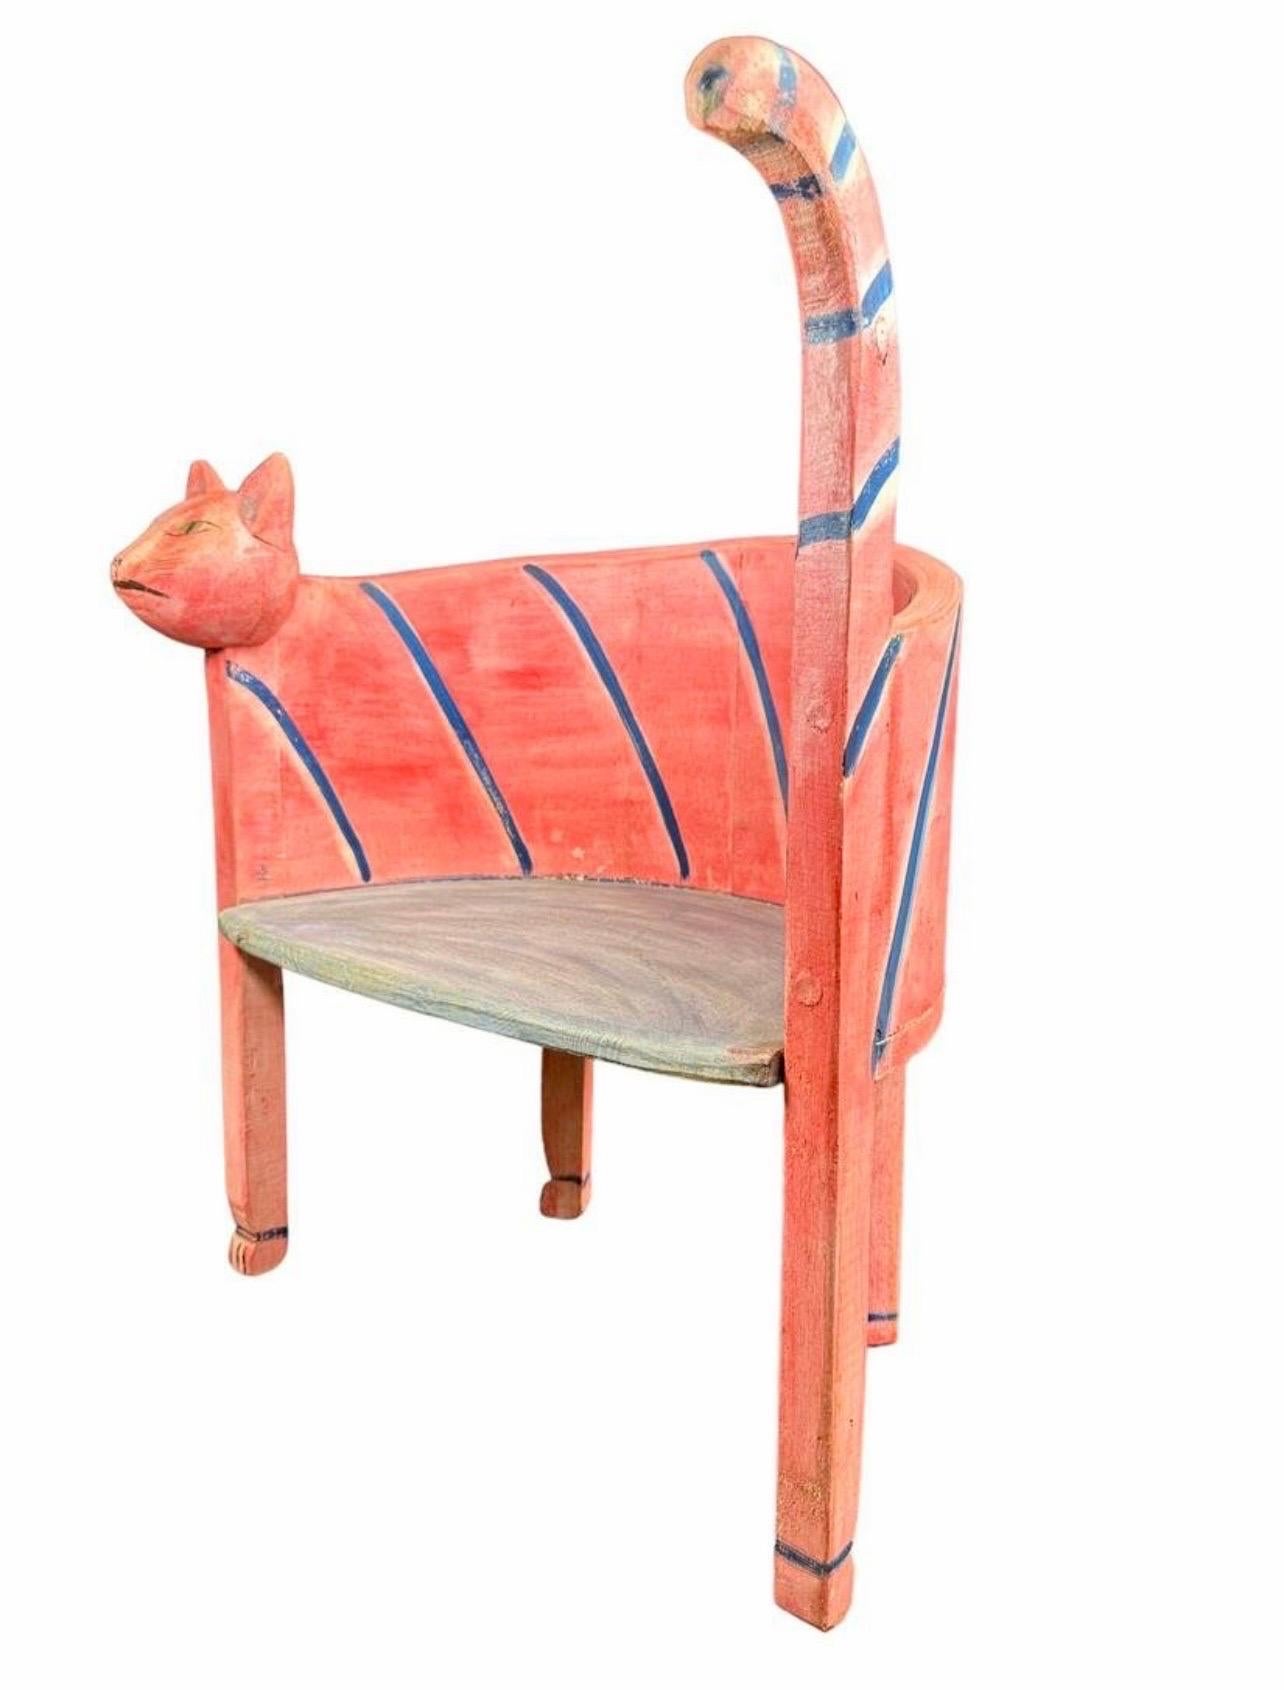 French Folk Art Hand Carved Painted Whimsical Childrens Cat Chair Gerard Rigot For Sale 3